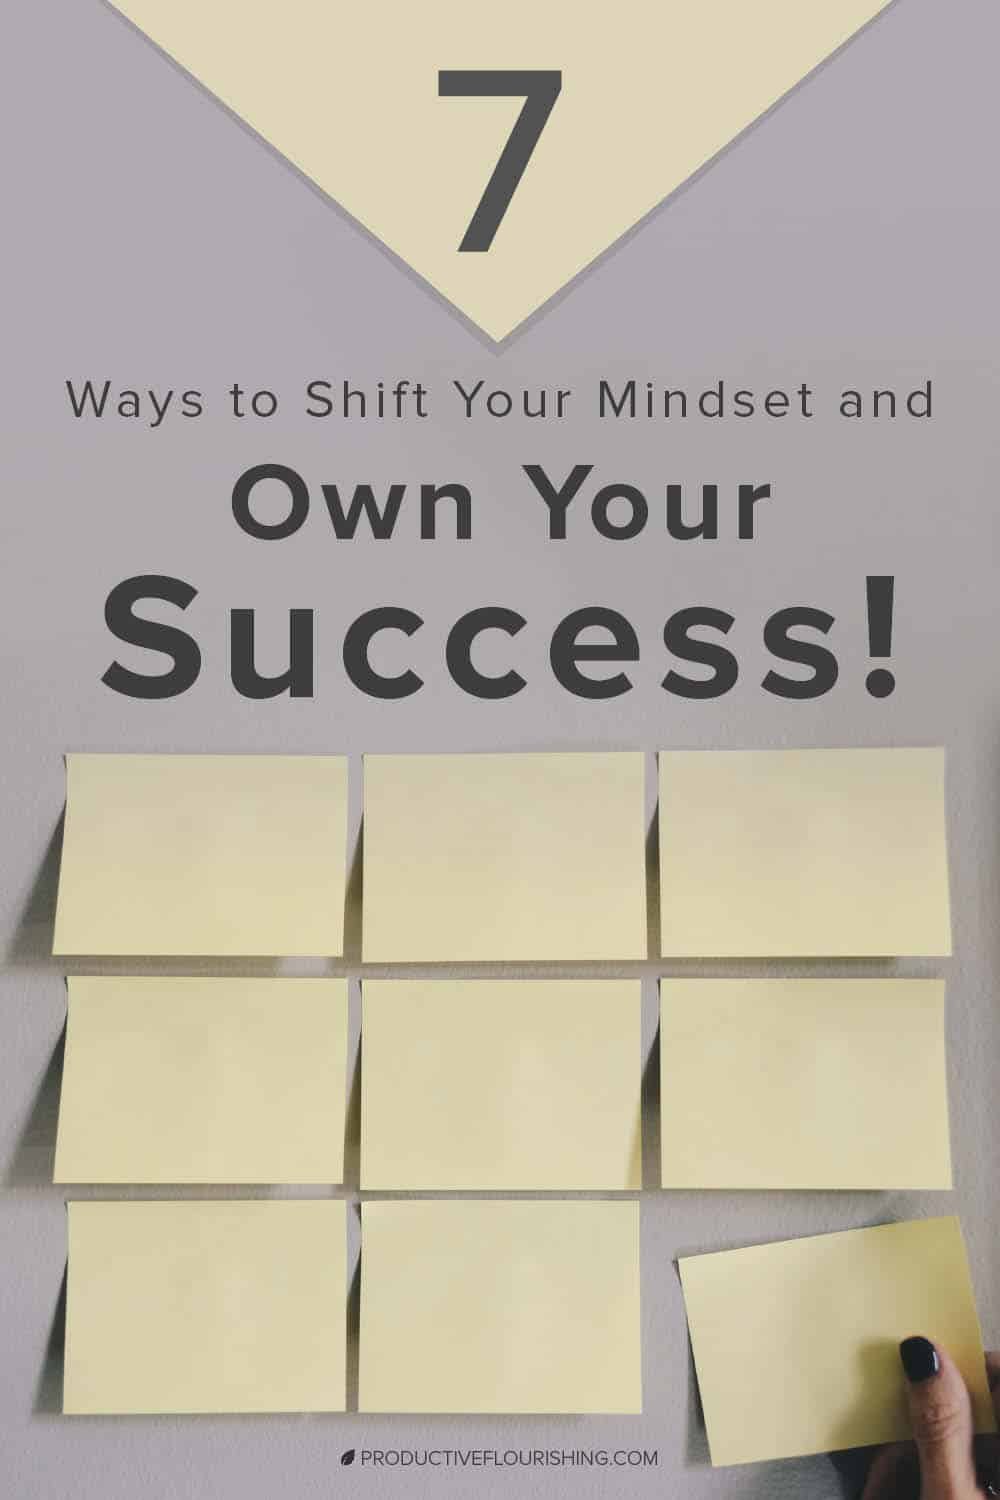 Learn these 7 ways to shift your mindset and own your success. As you consider making a shift in mindset — from fulfilling other people’s definition of success to fulfilling your own — these suggestions may be helpful. #productiveflourishing #successmindset #entrepreneur